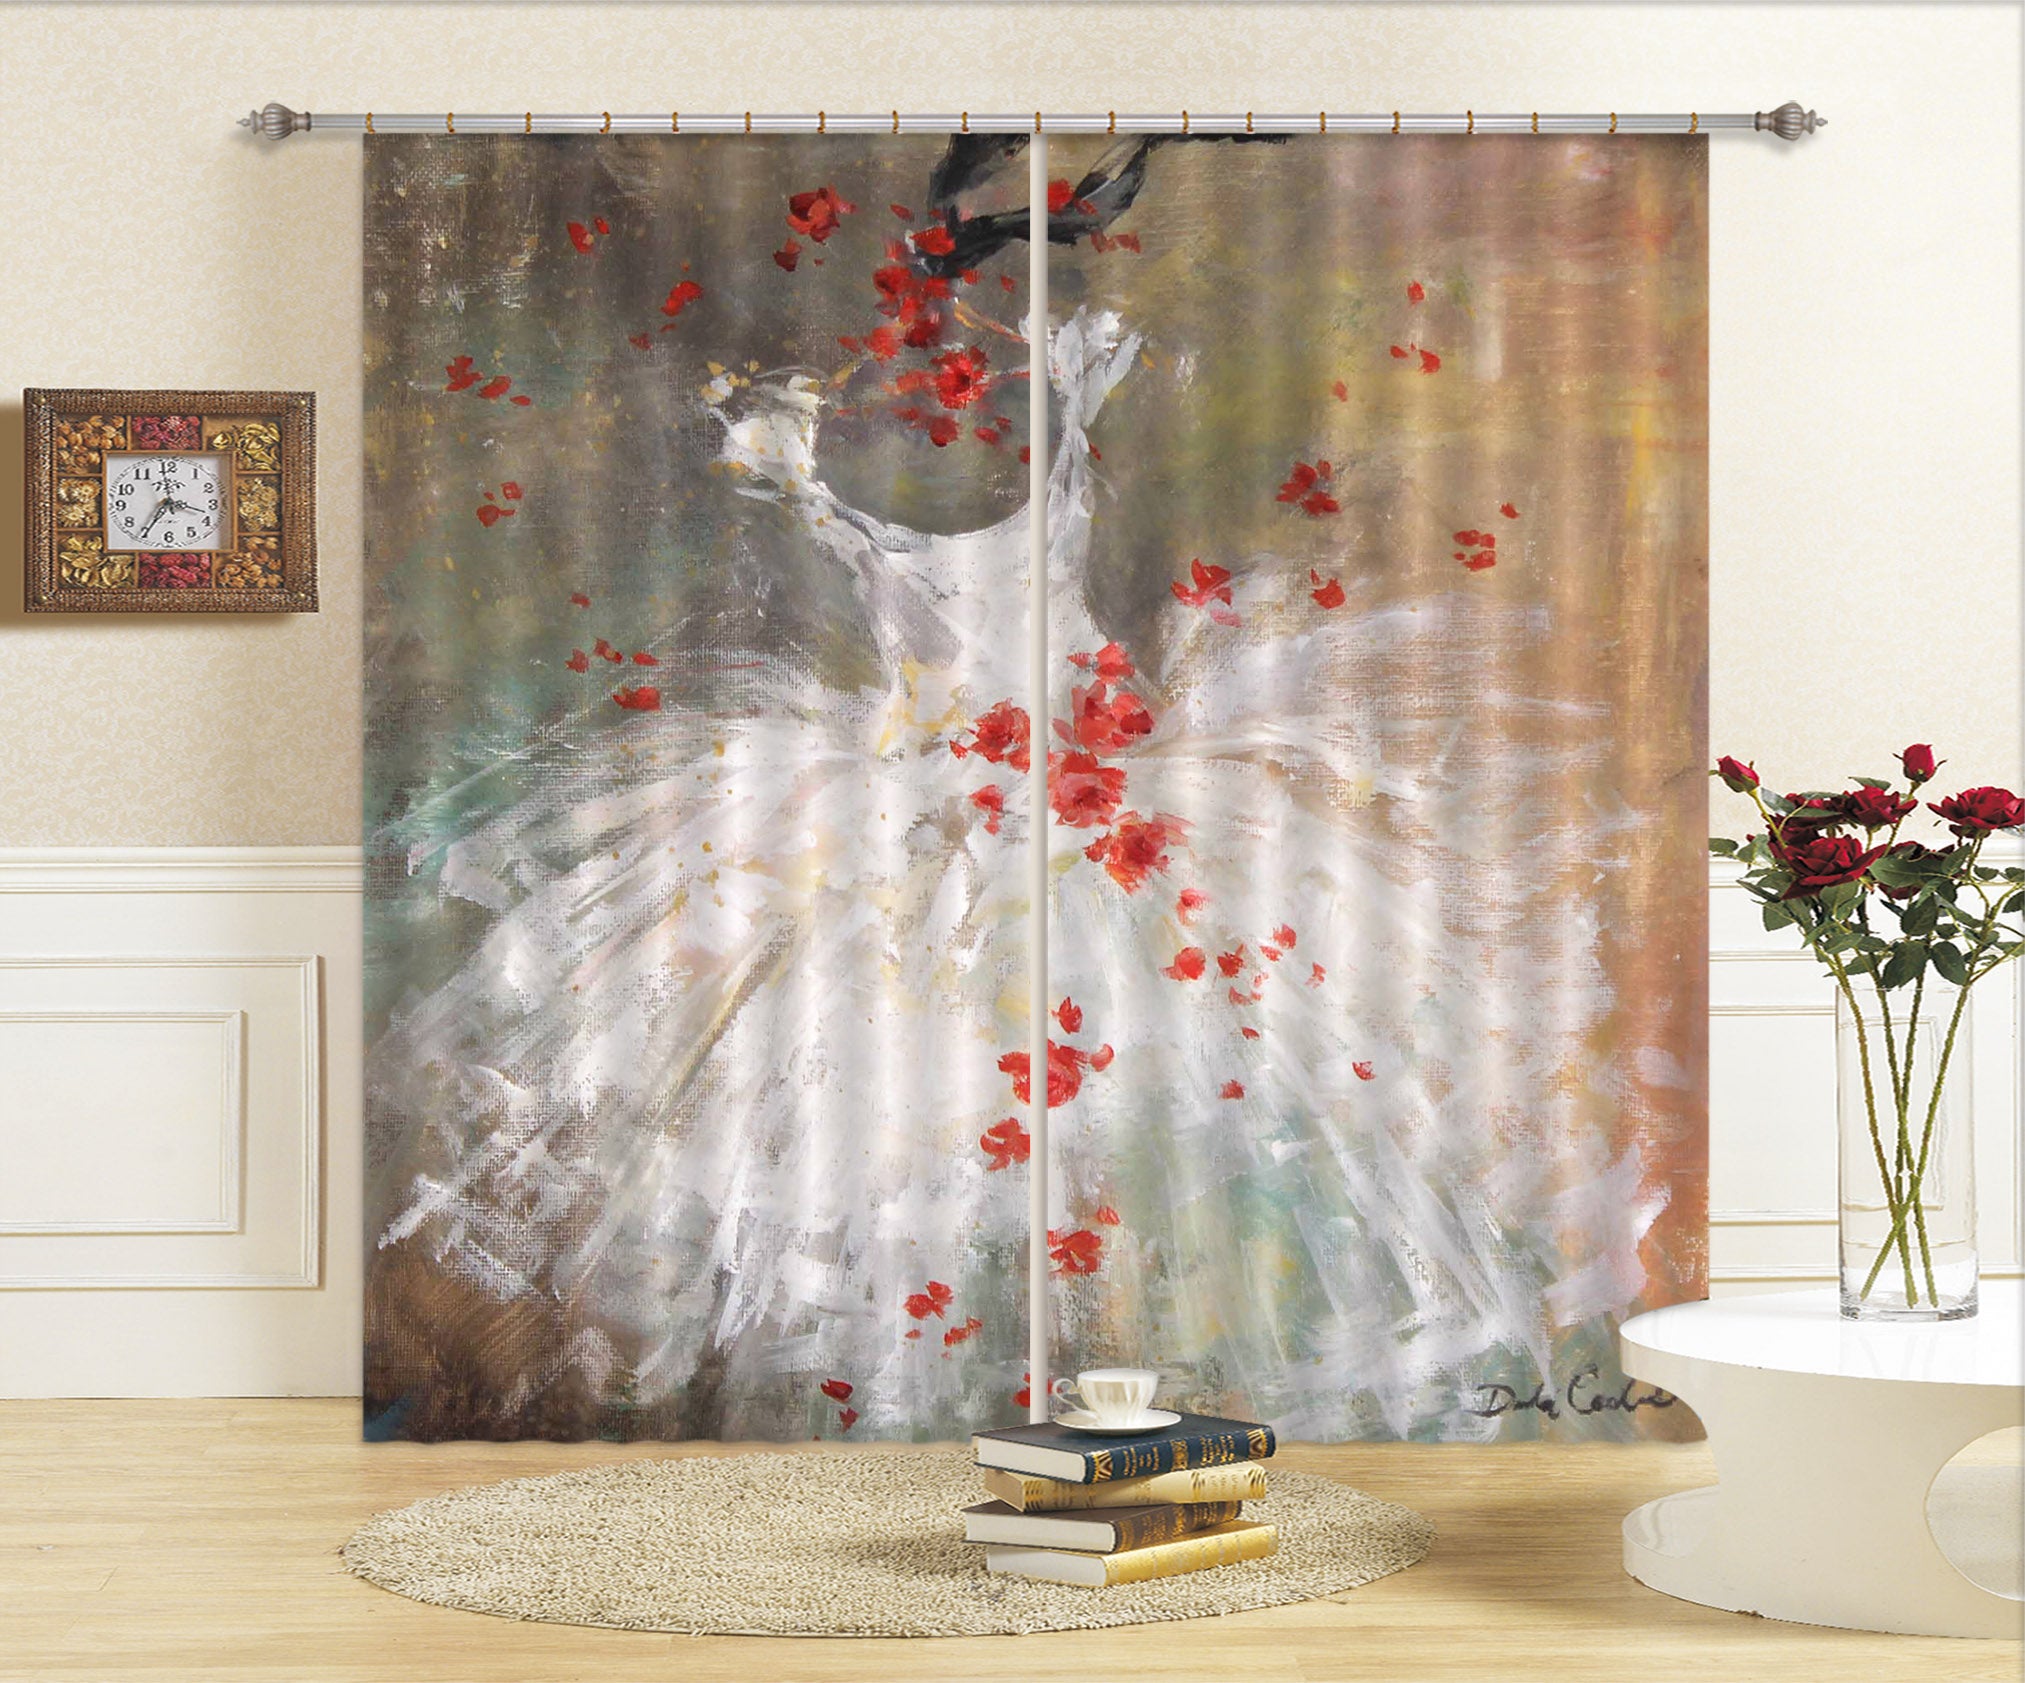 3D White Skirt Red Petals 2192 Debi Coules Curtain Curtains Drapes